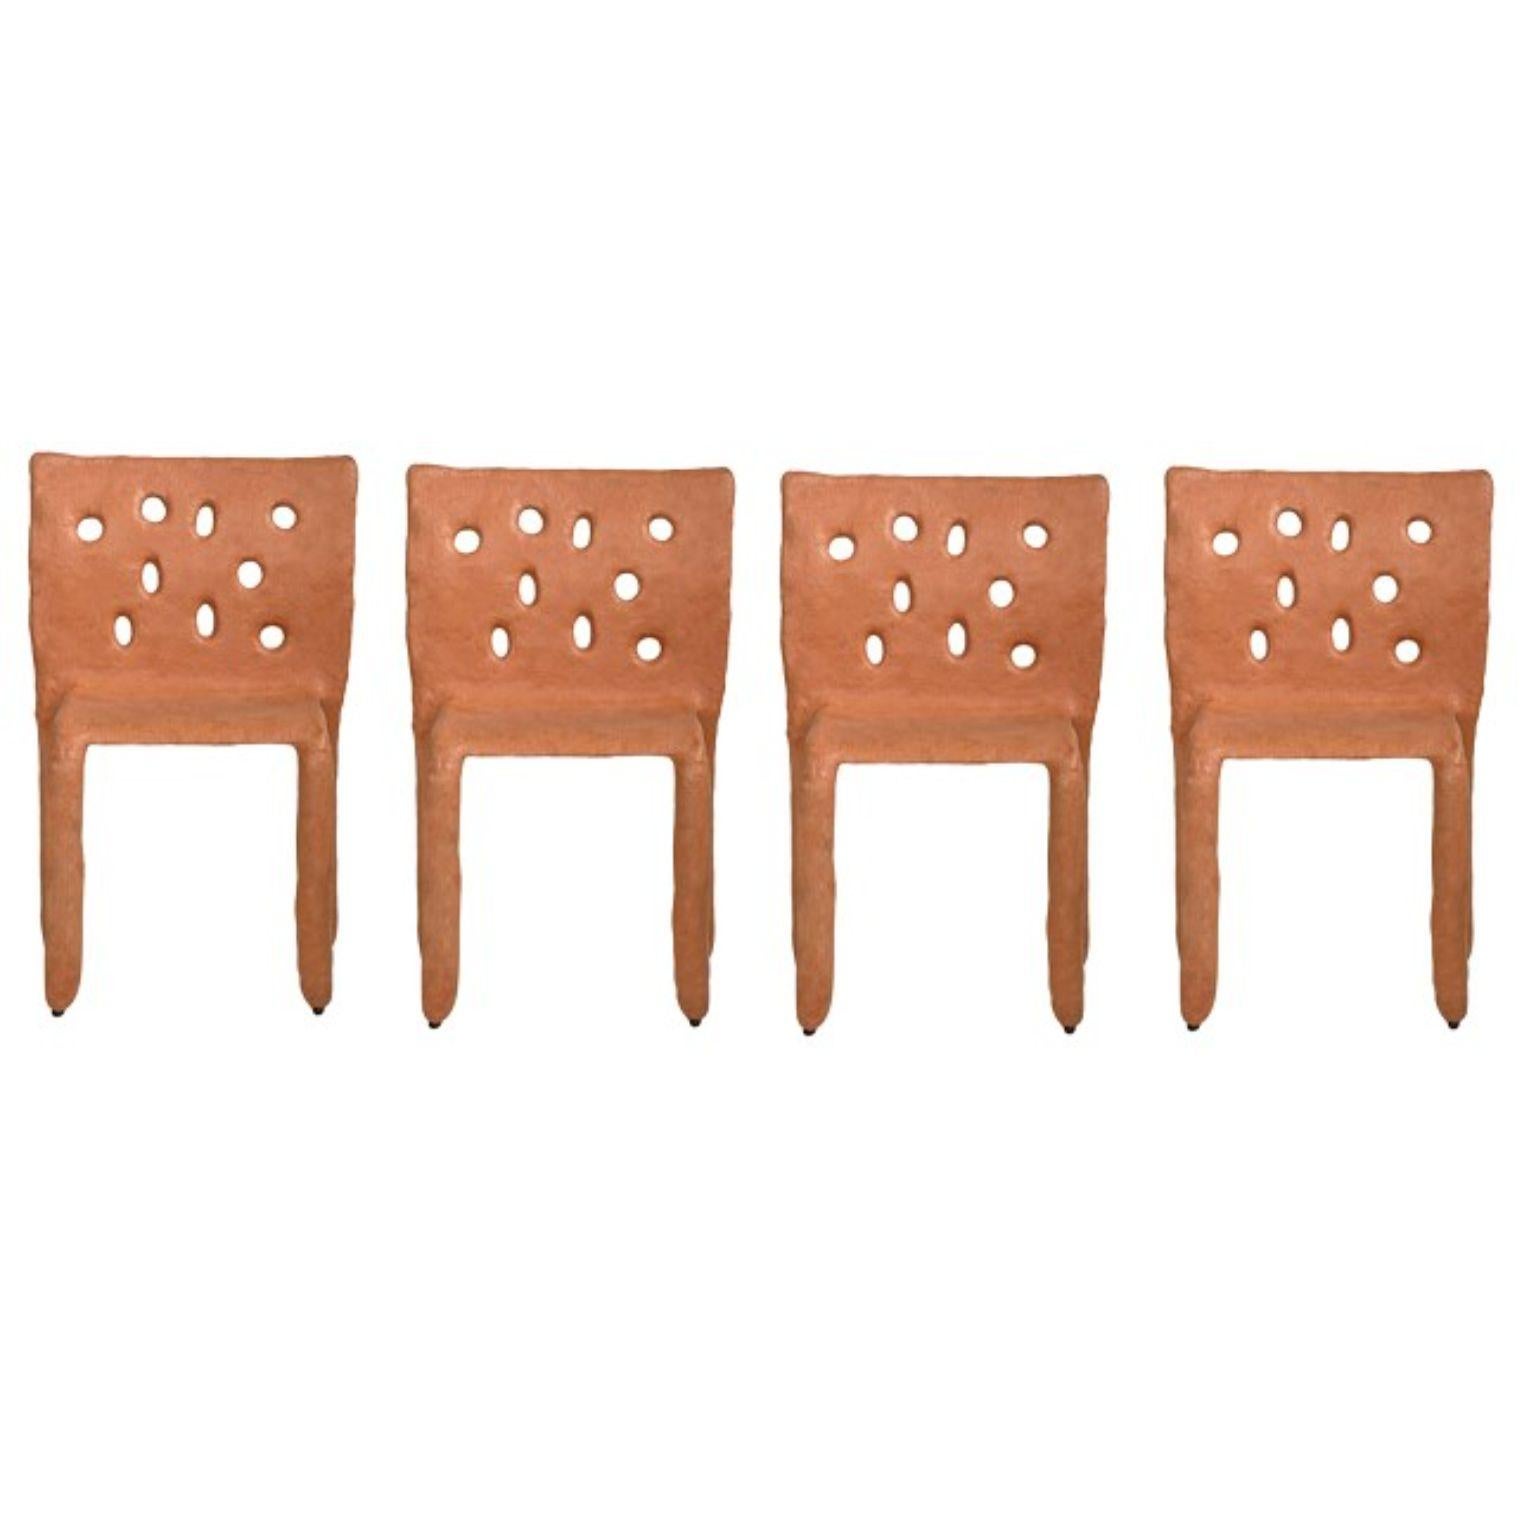 Set of 4 orange sculpted contemporary chairs by Faina
Design: Victoriya Yakusha
Material: steel, flax rubber, biopolymer, cellulose
Dimensions: height 82 x width 54 x legs depth 45 cm
Weight: 15 kilos.

Indoor finish available.

Made in the